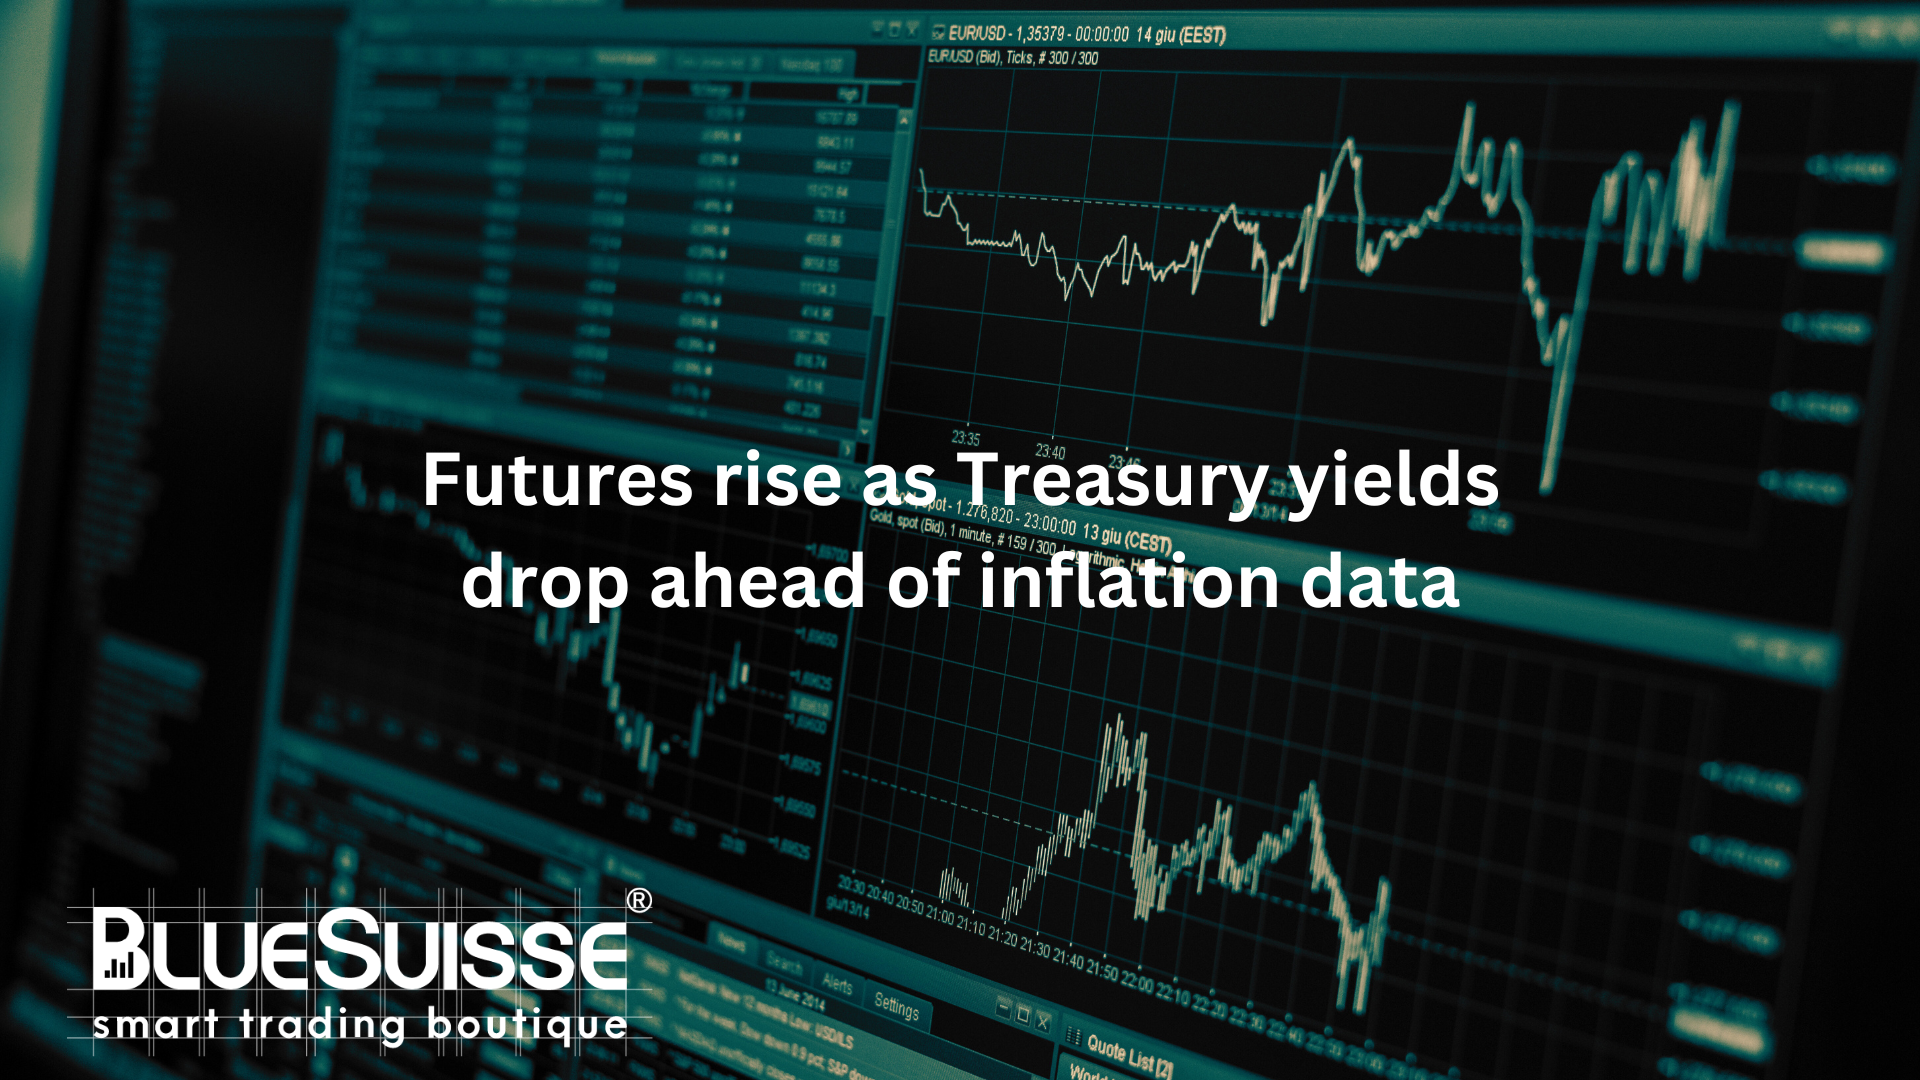 Futures rise as Treasury yields drop ahead of inflation data